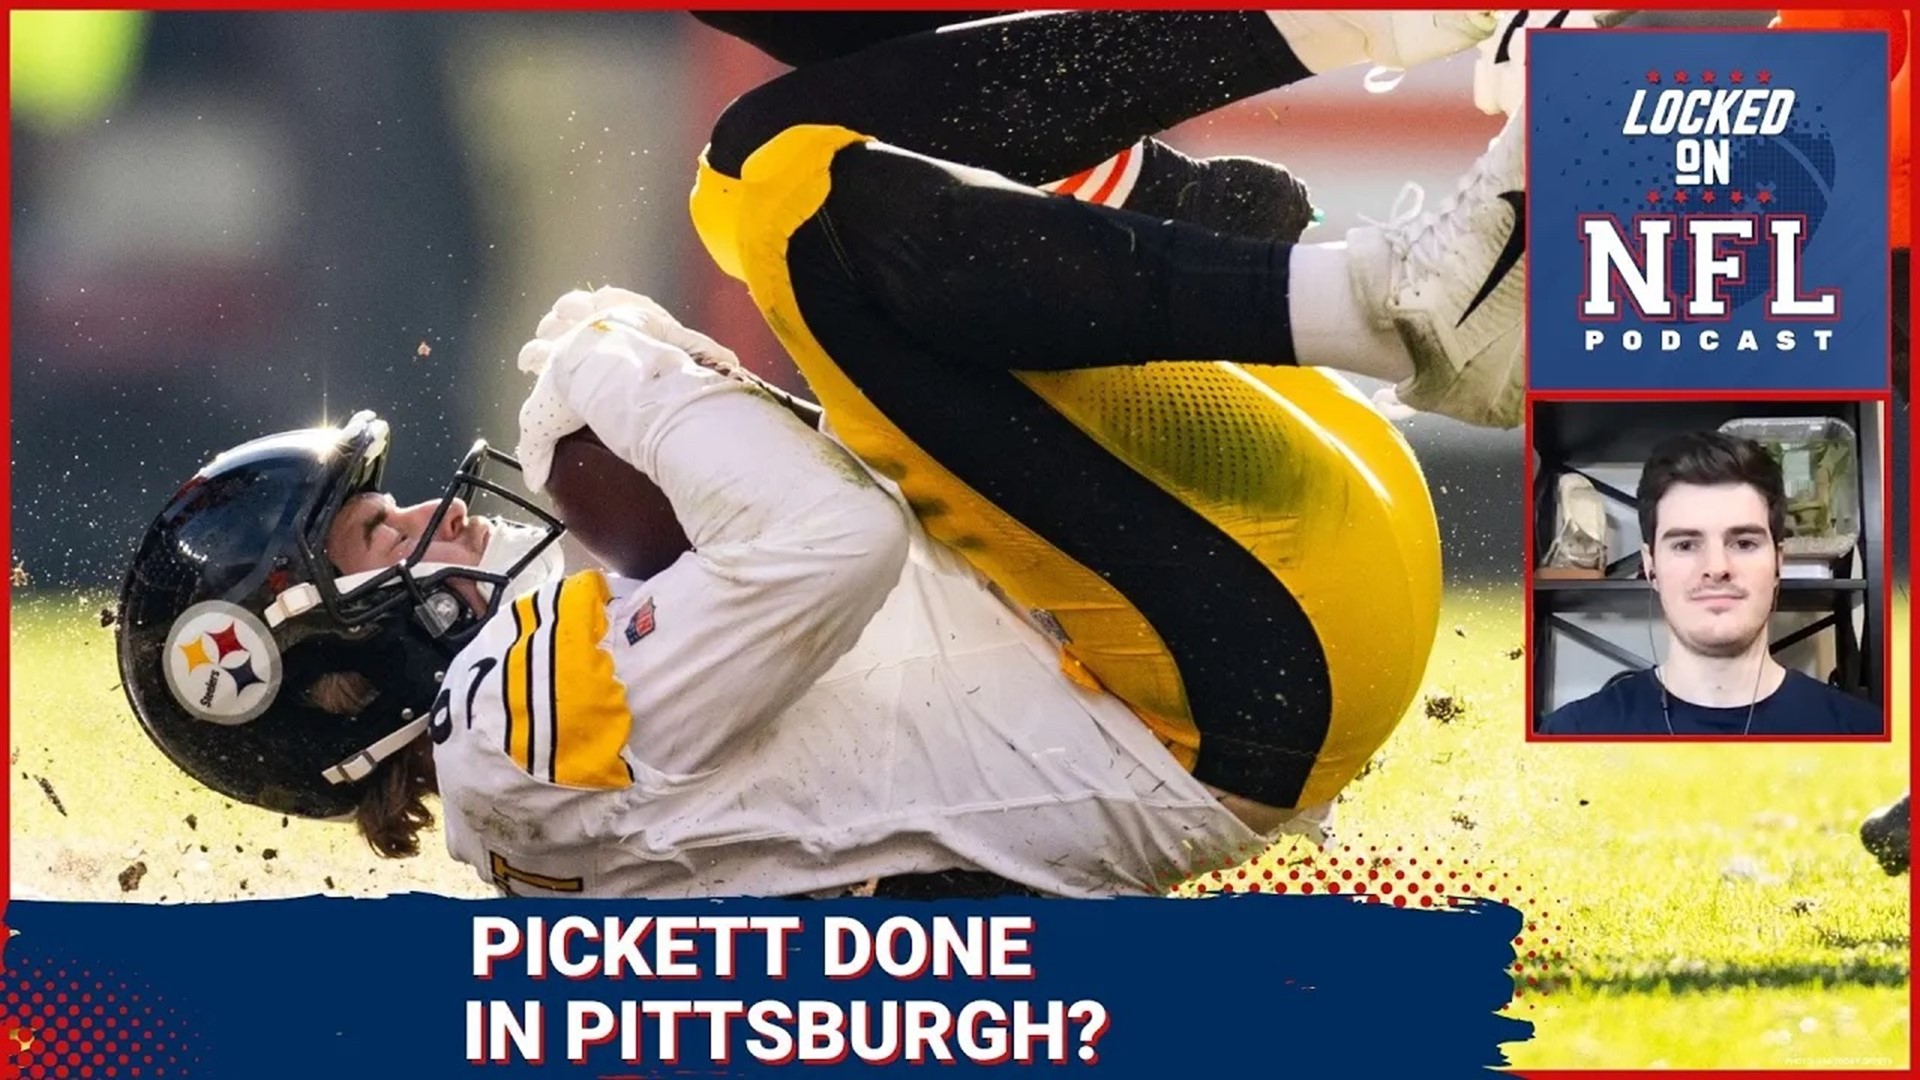 We look at if the Pittsburgh Steelers are getting ready to move on from Kenny Pickett after an underwhelming early start to his career.